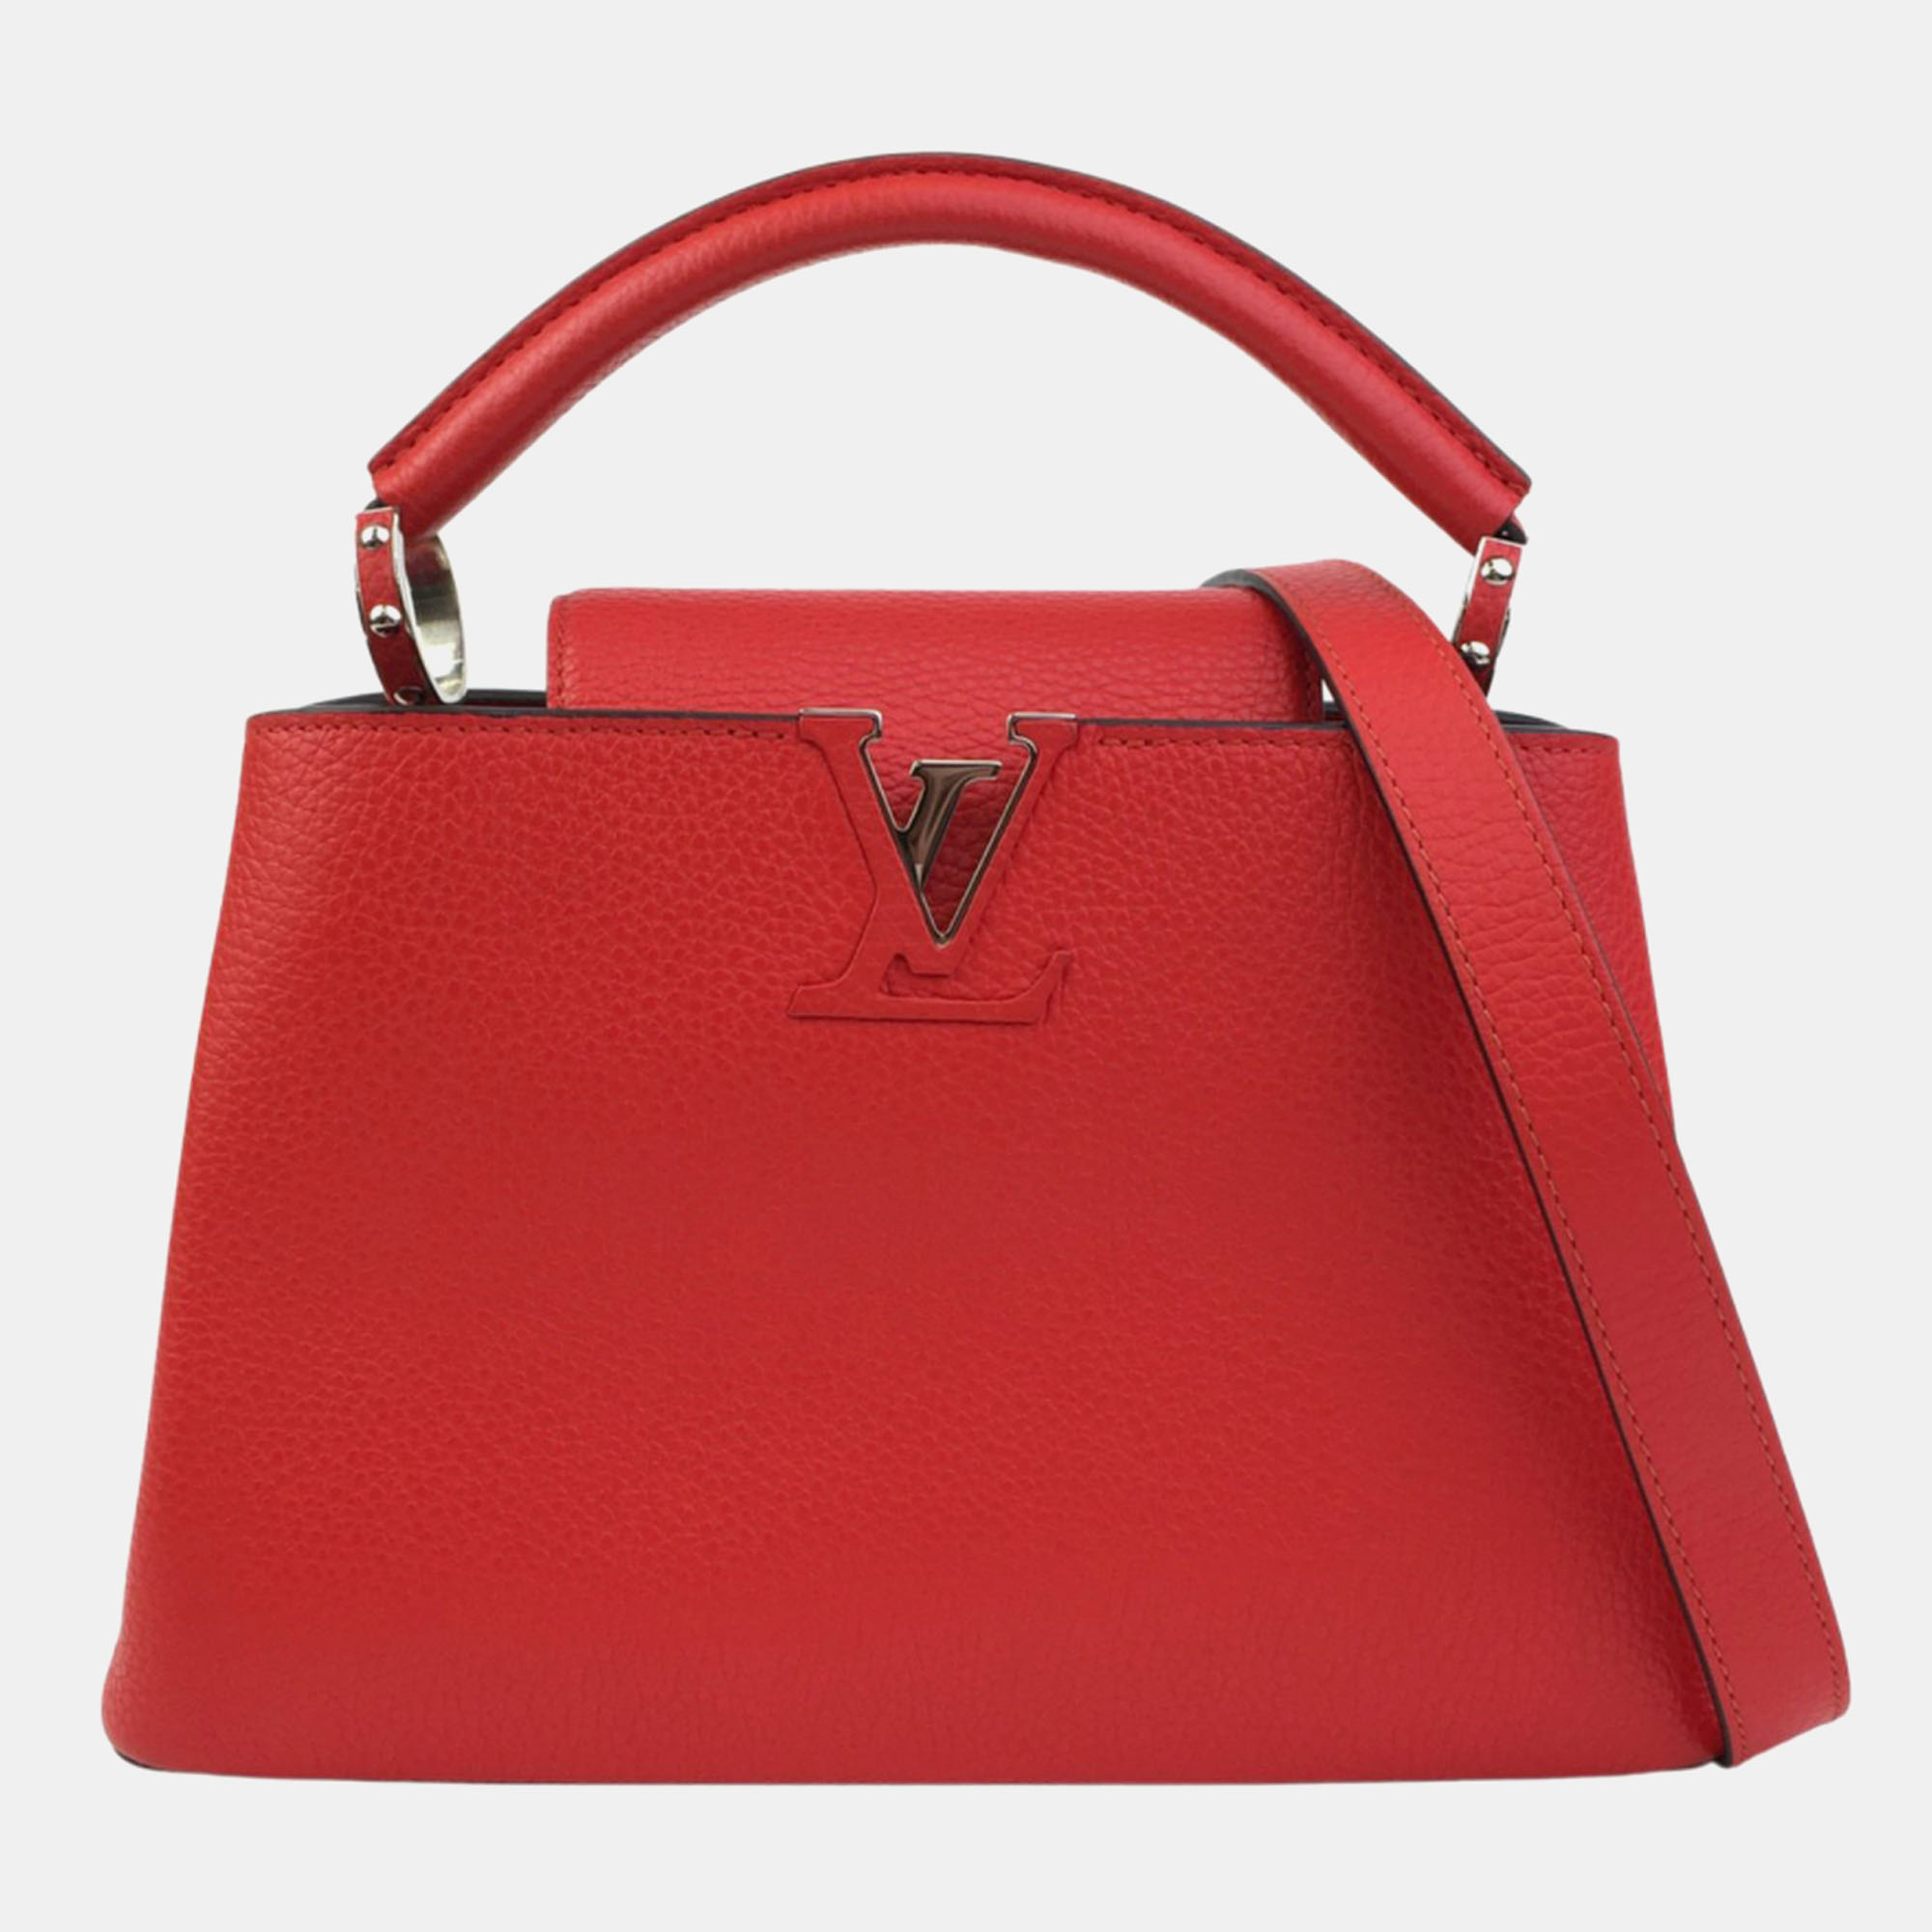 Louis vuitton red leather capucines bb top handle bag